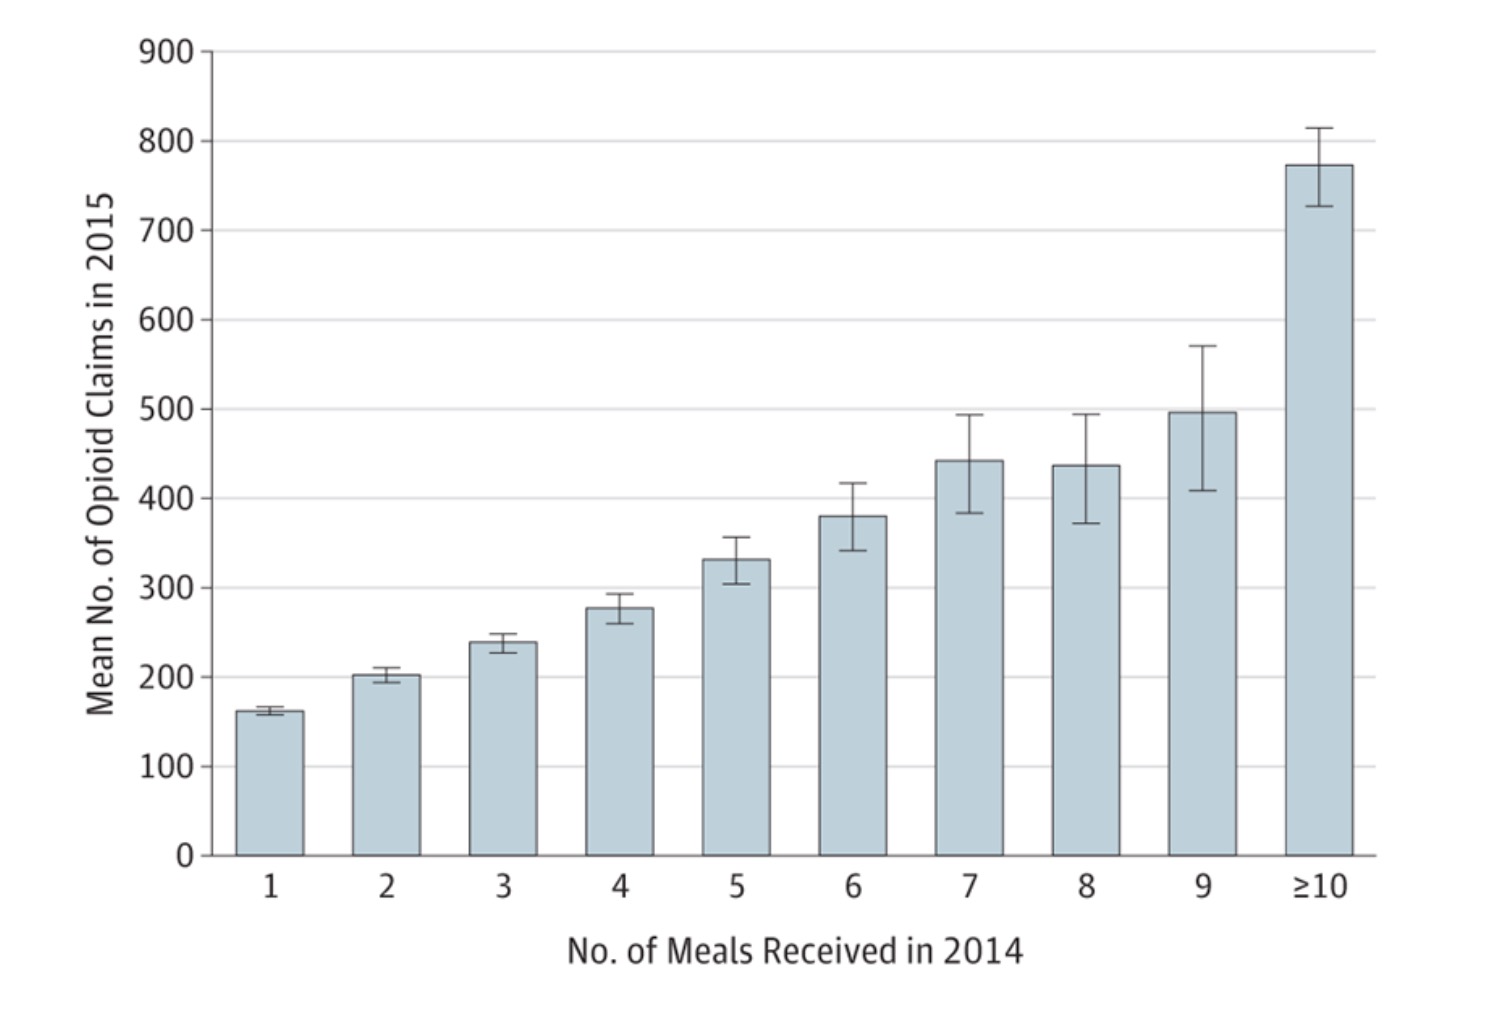 The more meals a doctor received in 2014, the more they prescribed opioids in 2015.